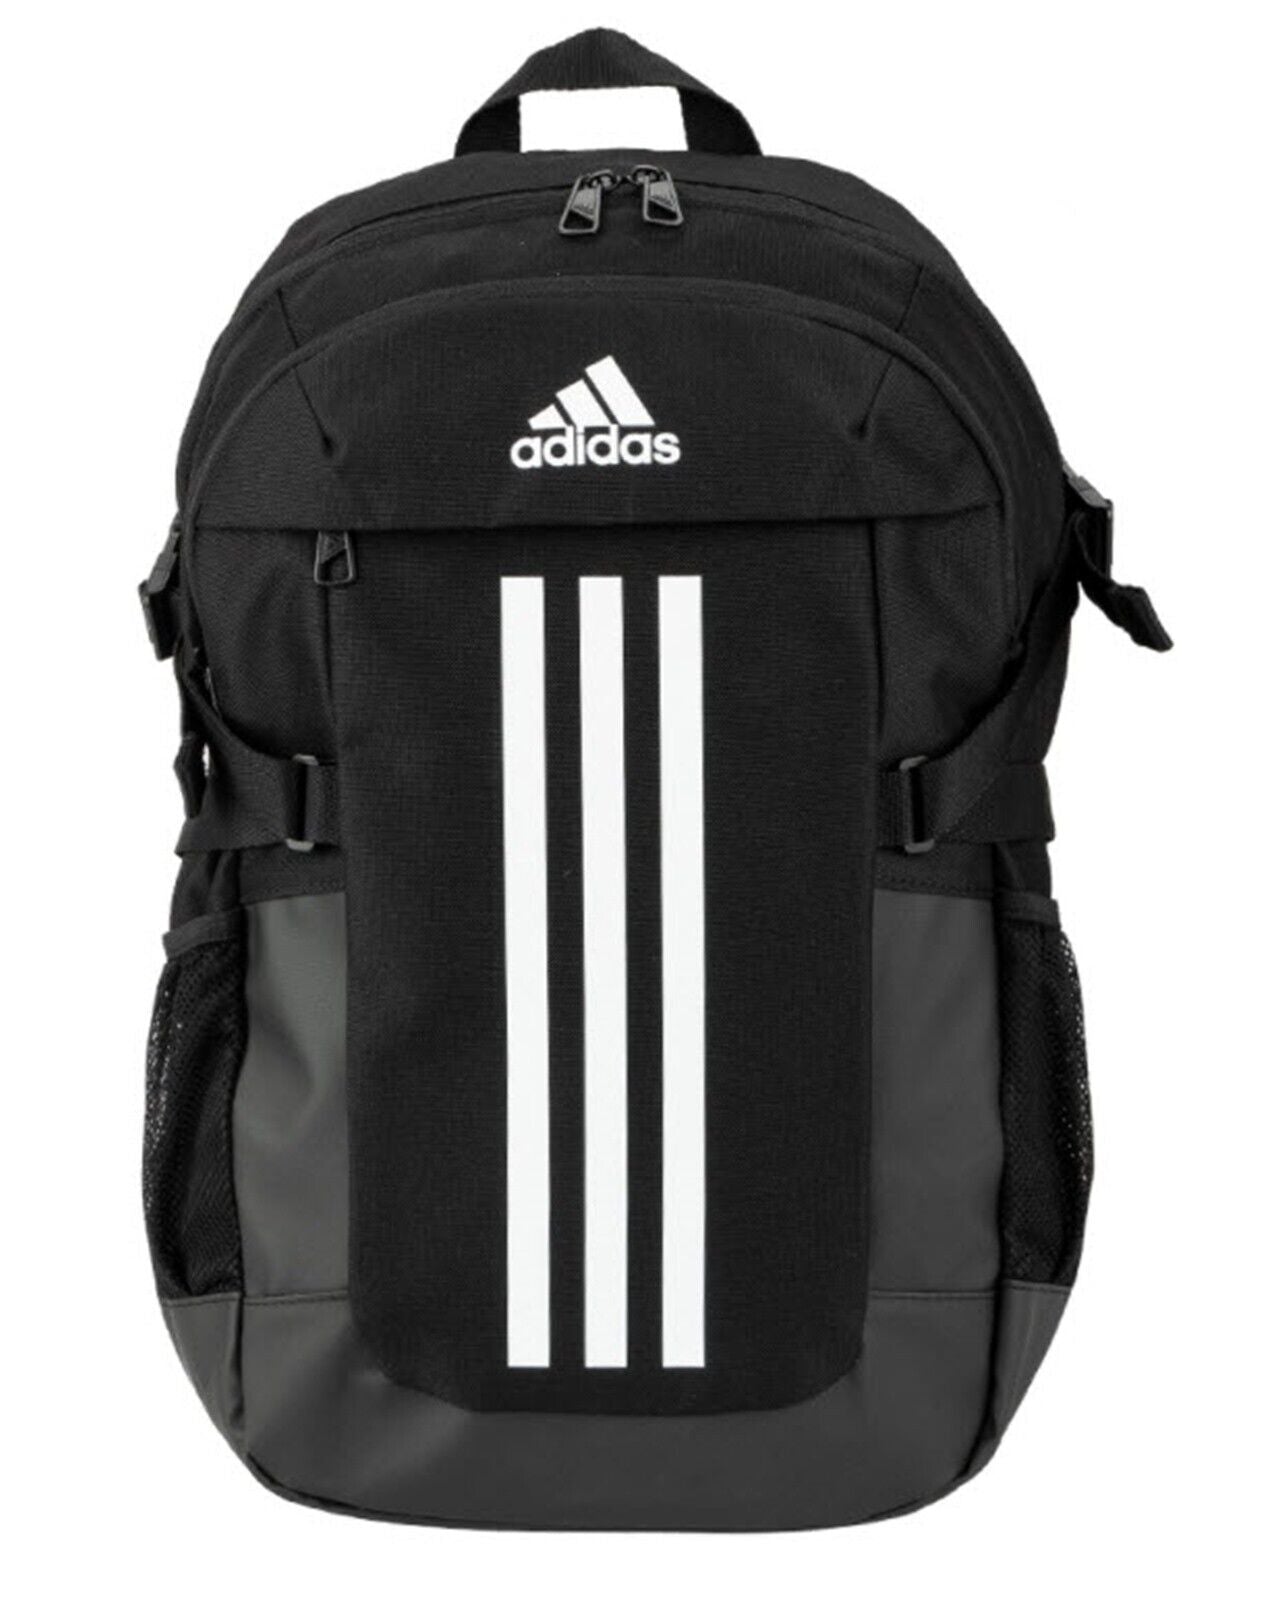 ADIDAS POWER VI BACKPACK BLK/WHT